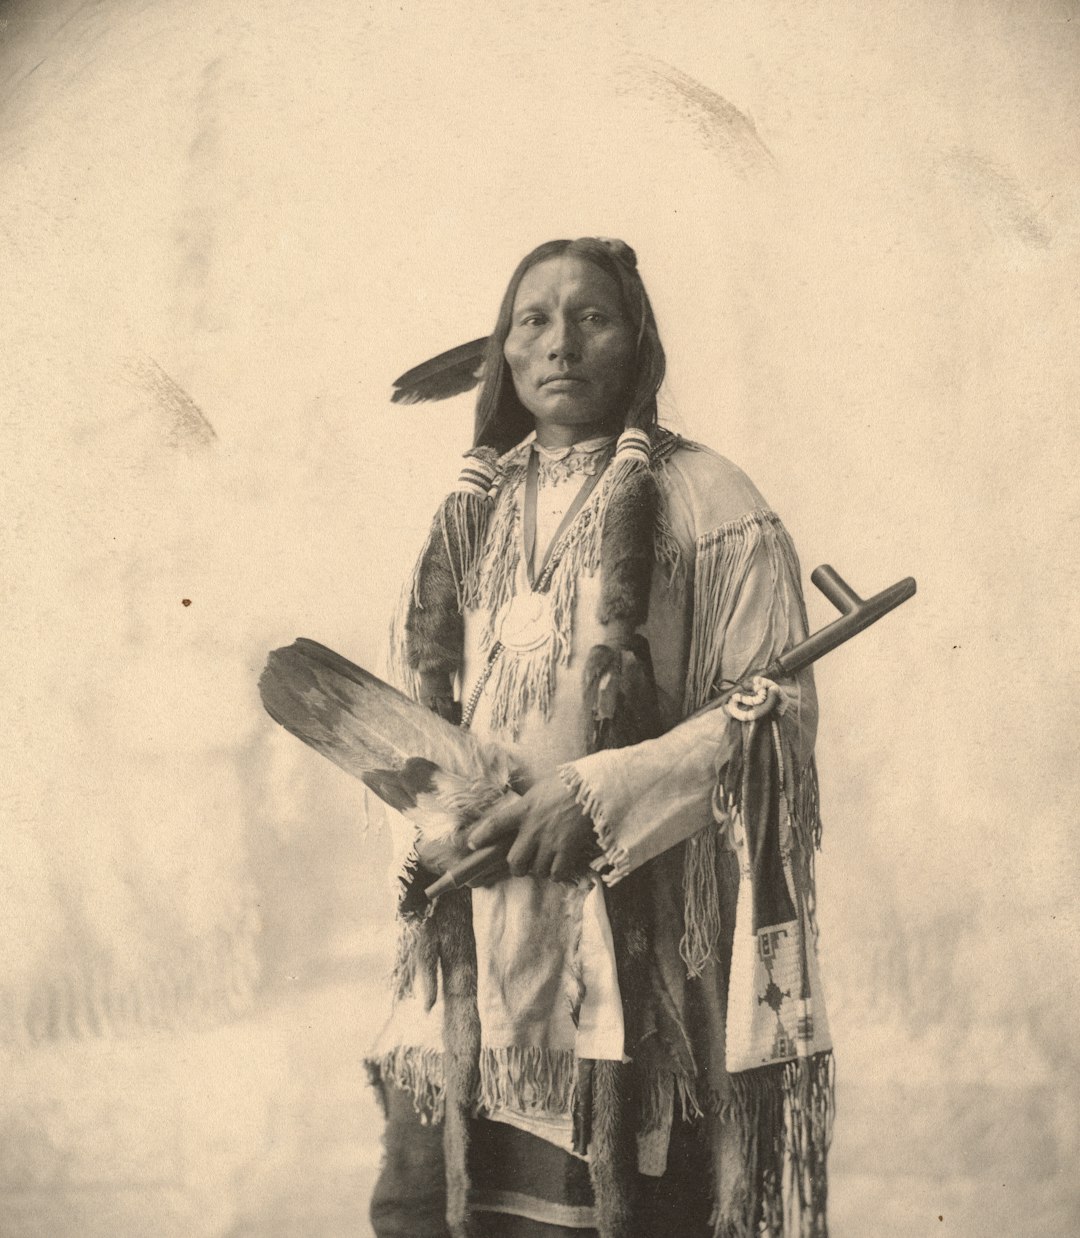 Native American Science and Medicine: An Overlooked History